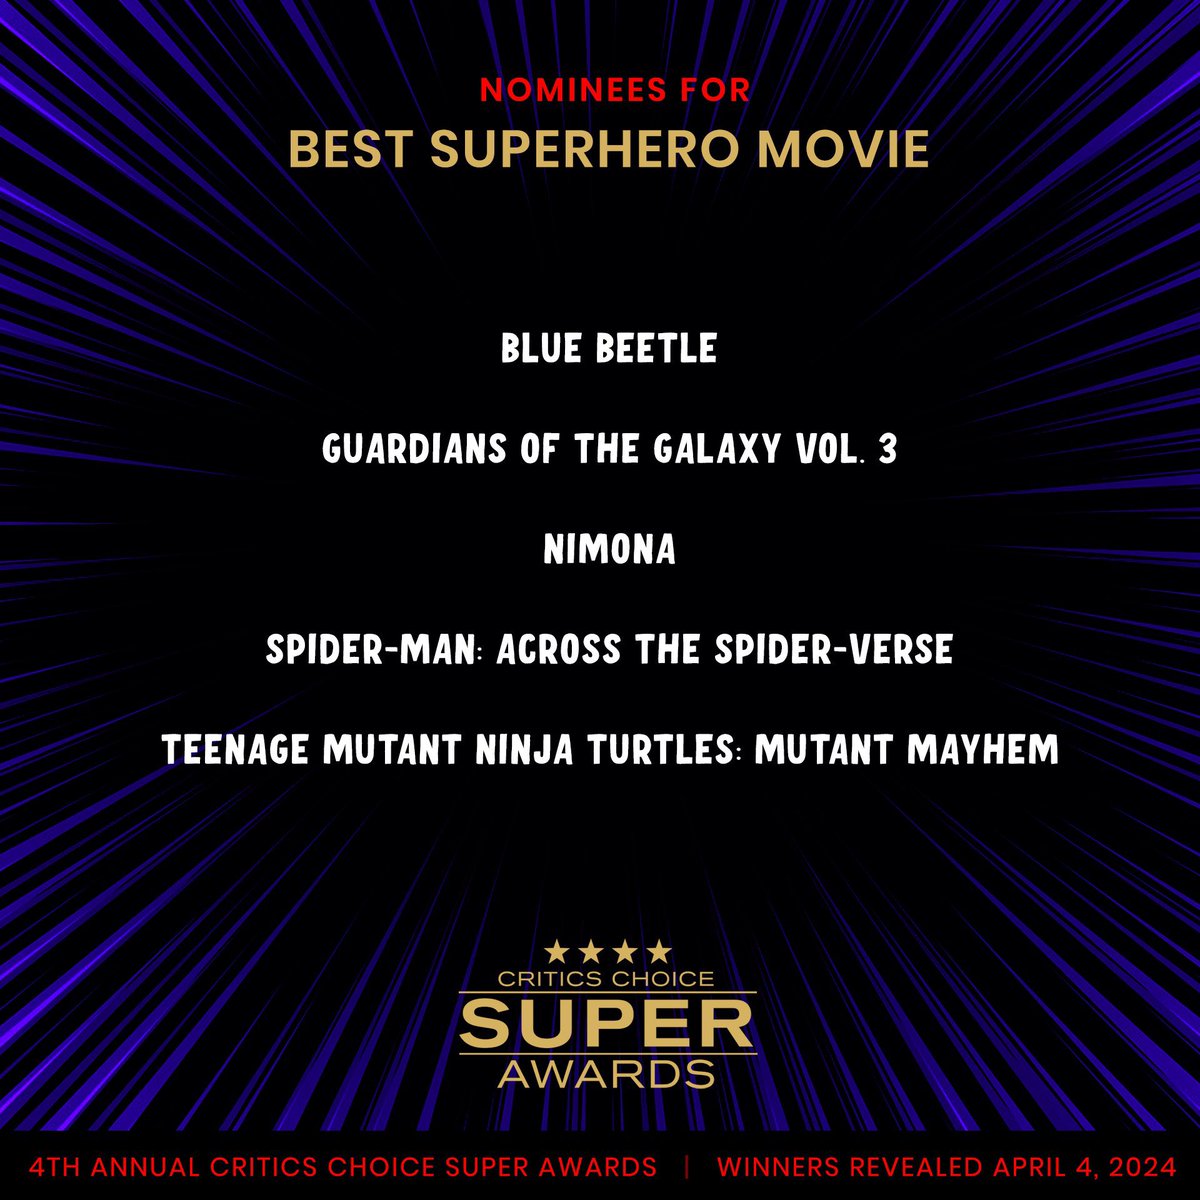 Blue Beetle was nominated for the Critics Choice Super Awards for 'BEST SUPERHERO MOVIE'. Winners will be announced April 4th, 2024 🌟
#CriticsChoice #CCSuperAwards